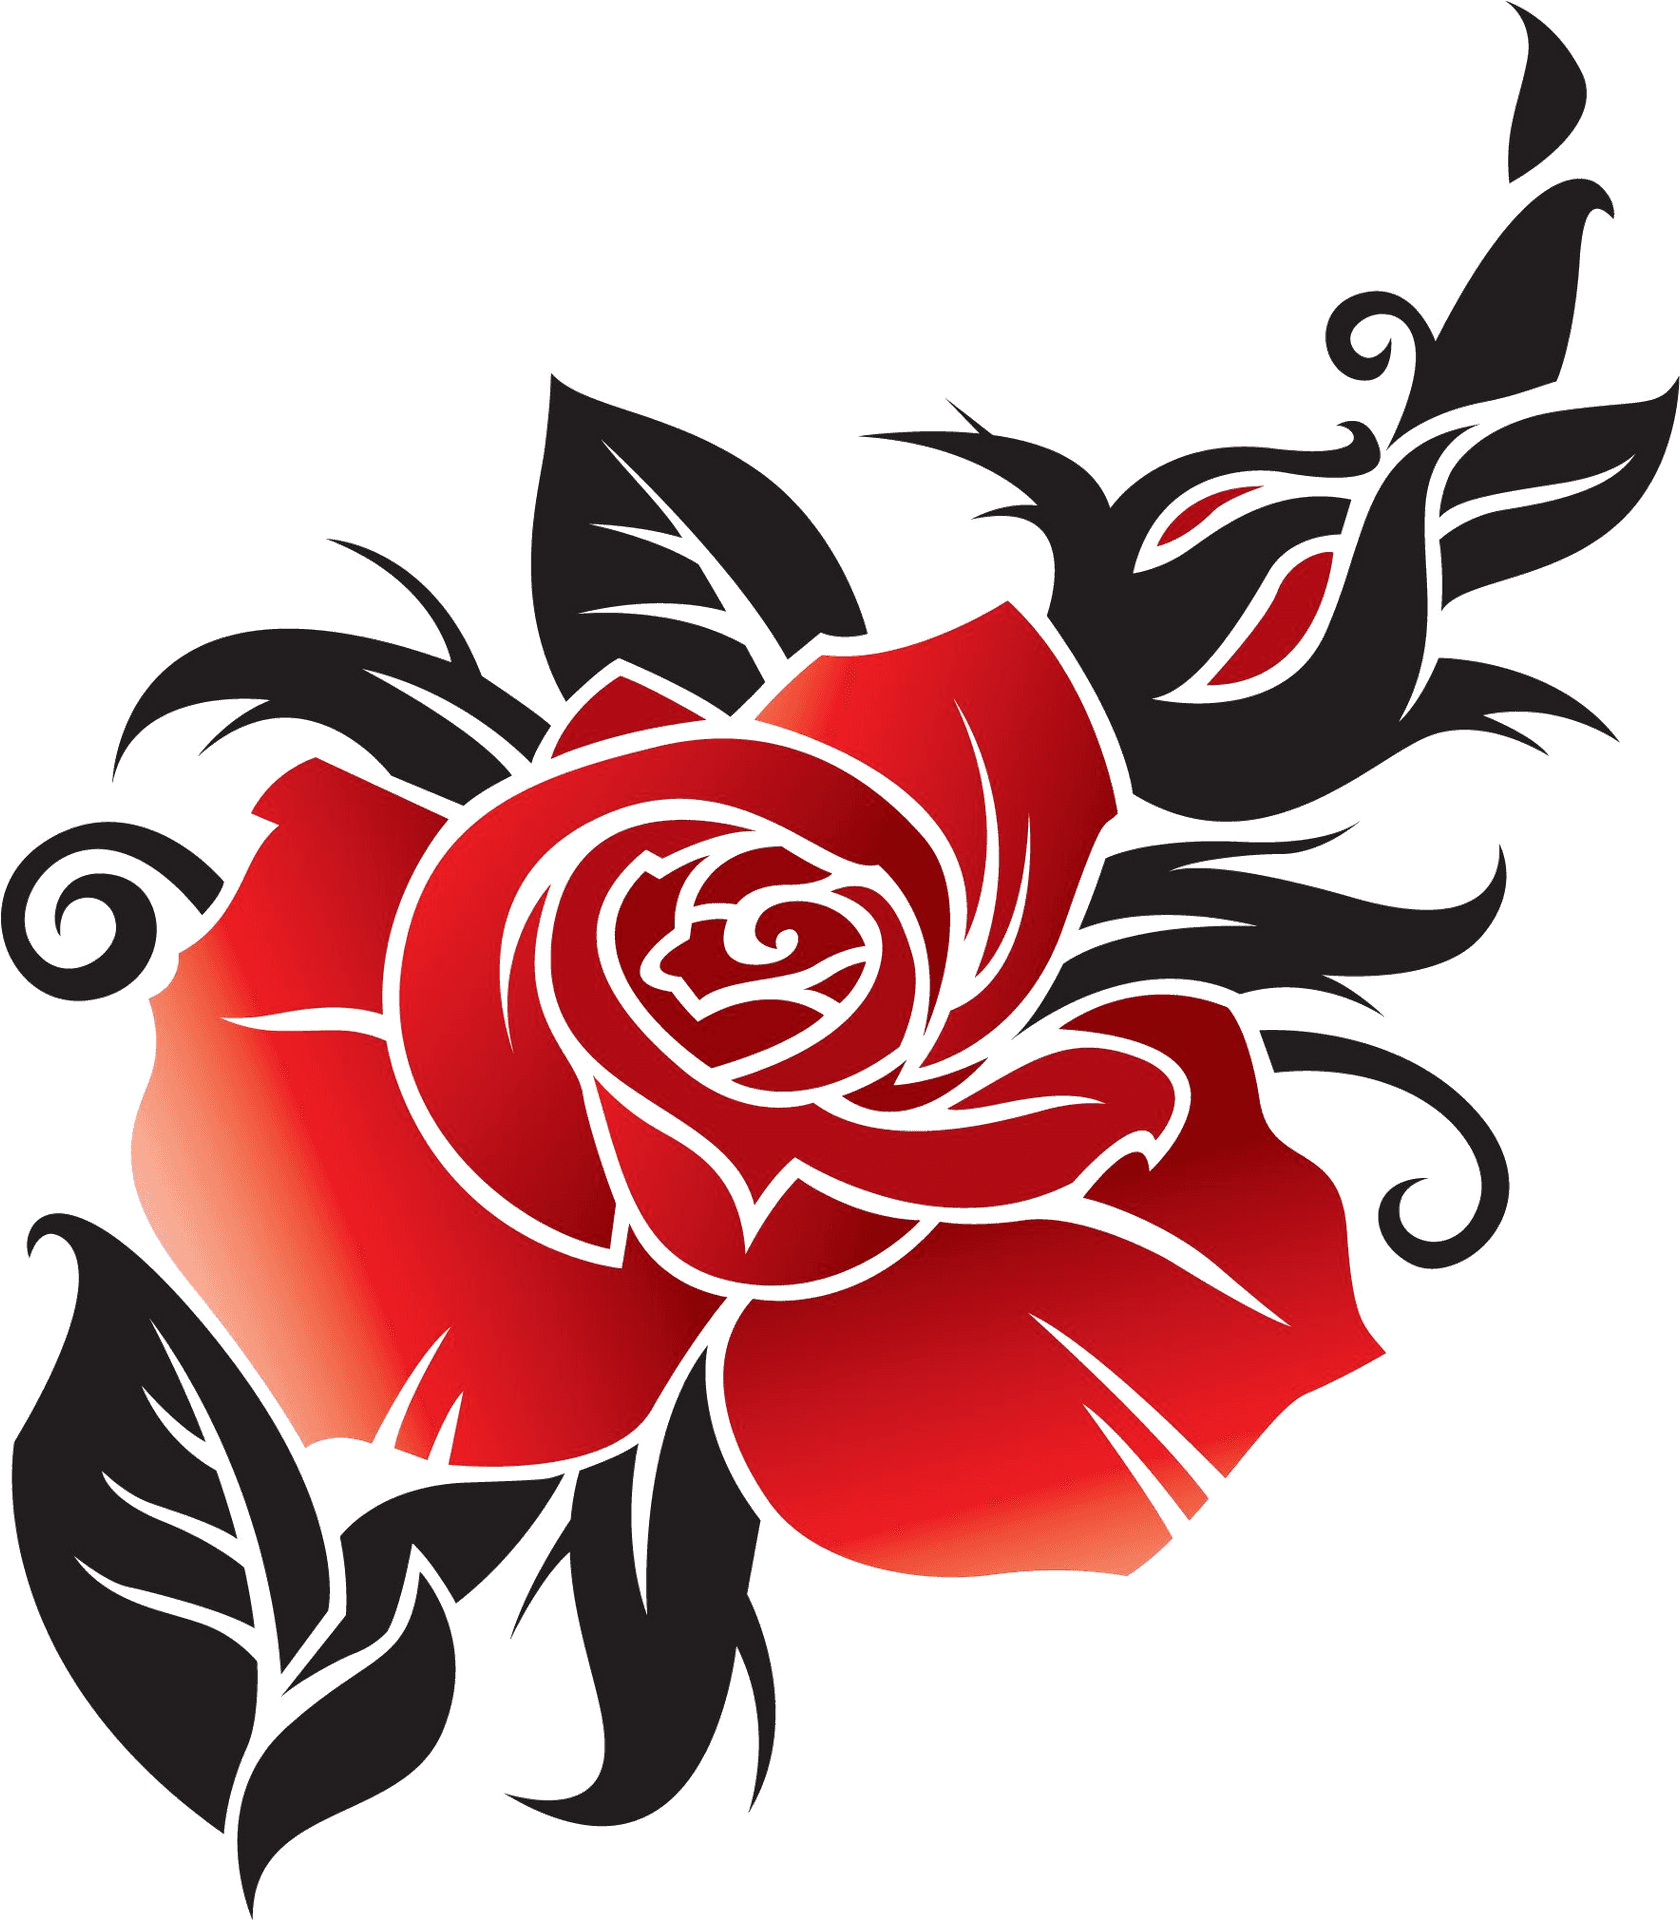 Free Vector Rose Silhouettes: Download SVG, PNG, DXF & More -  FreePatternsArea